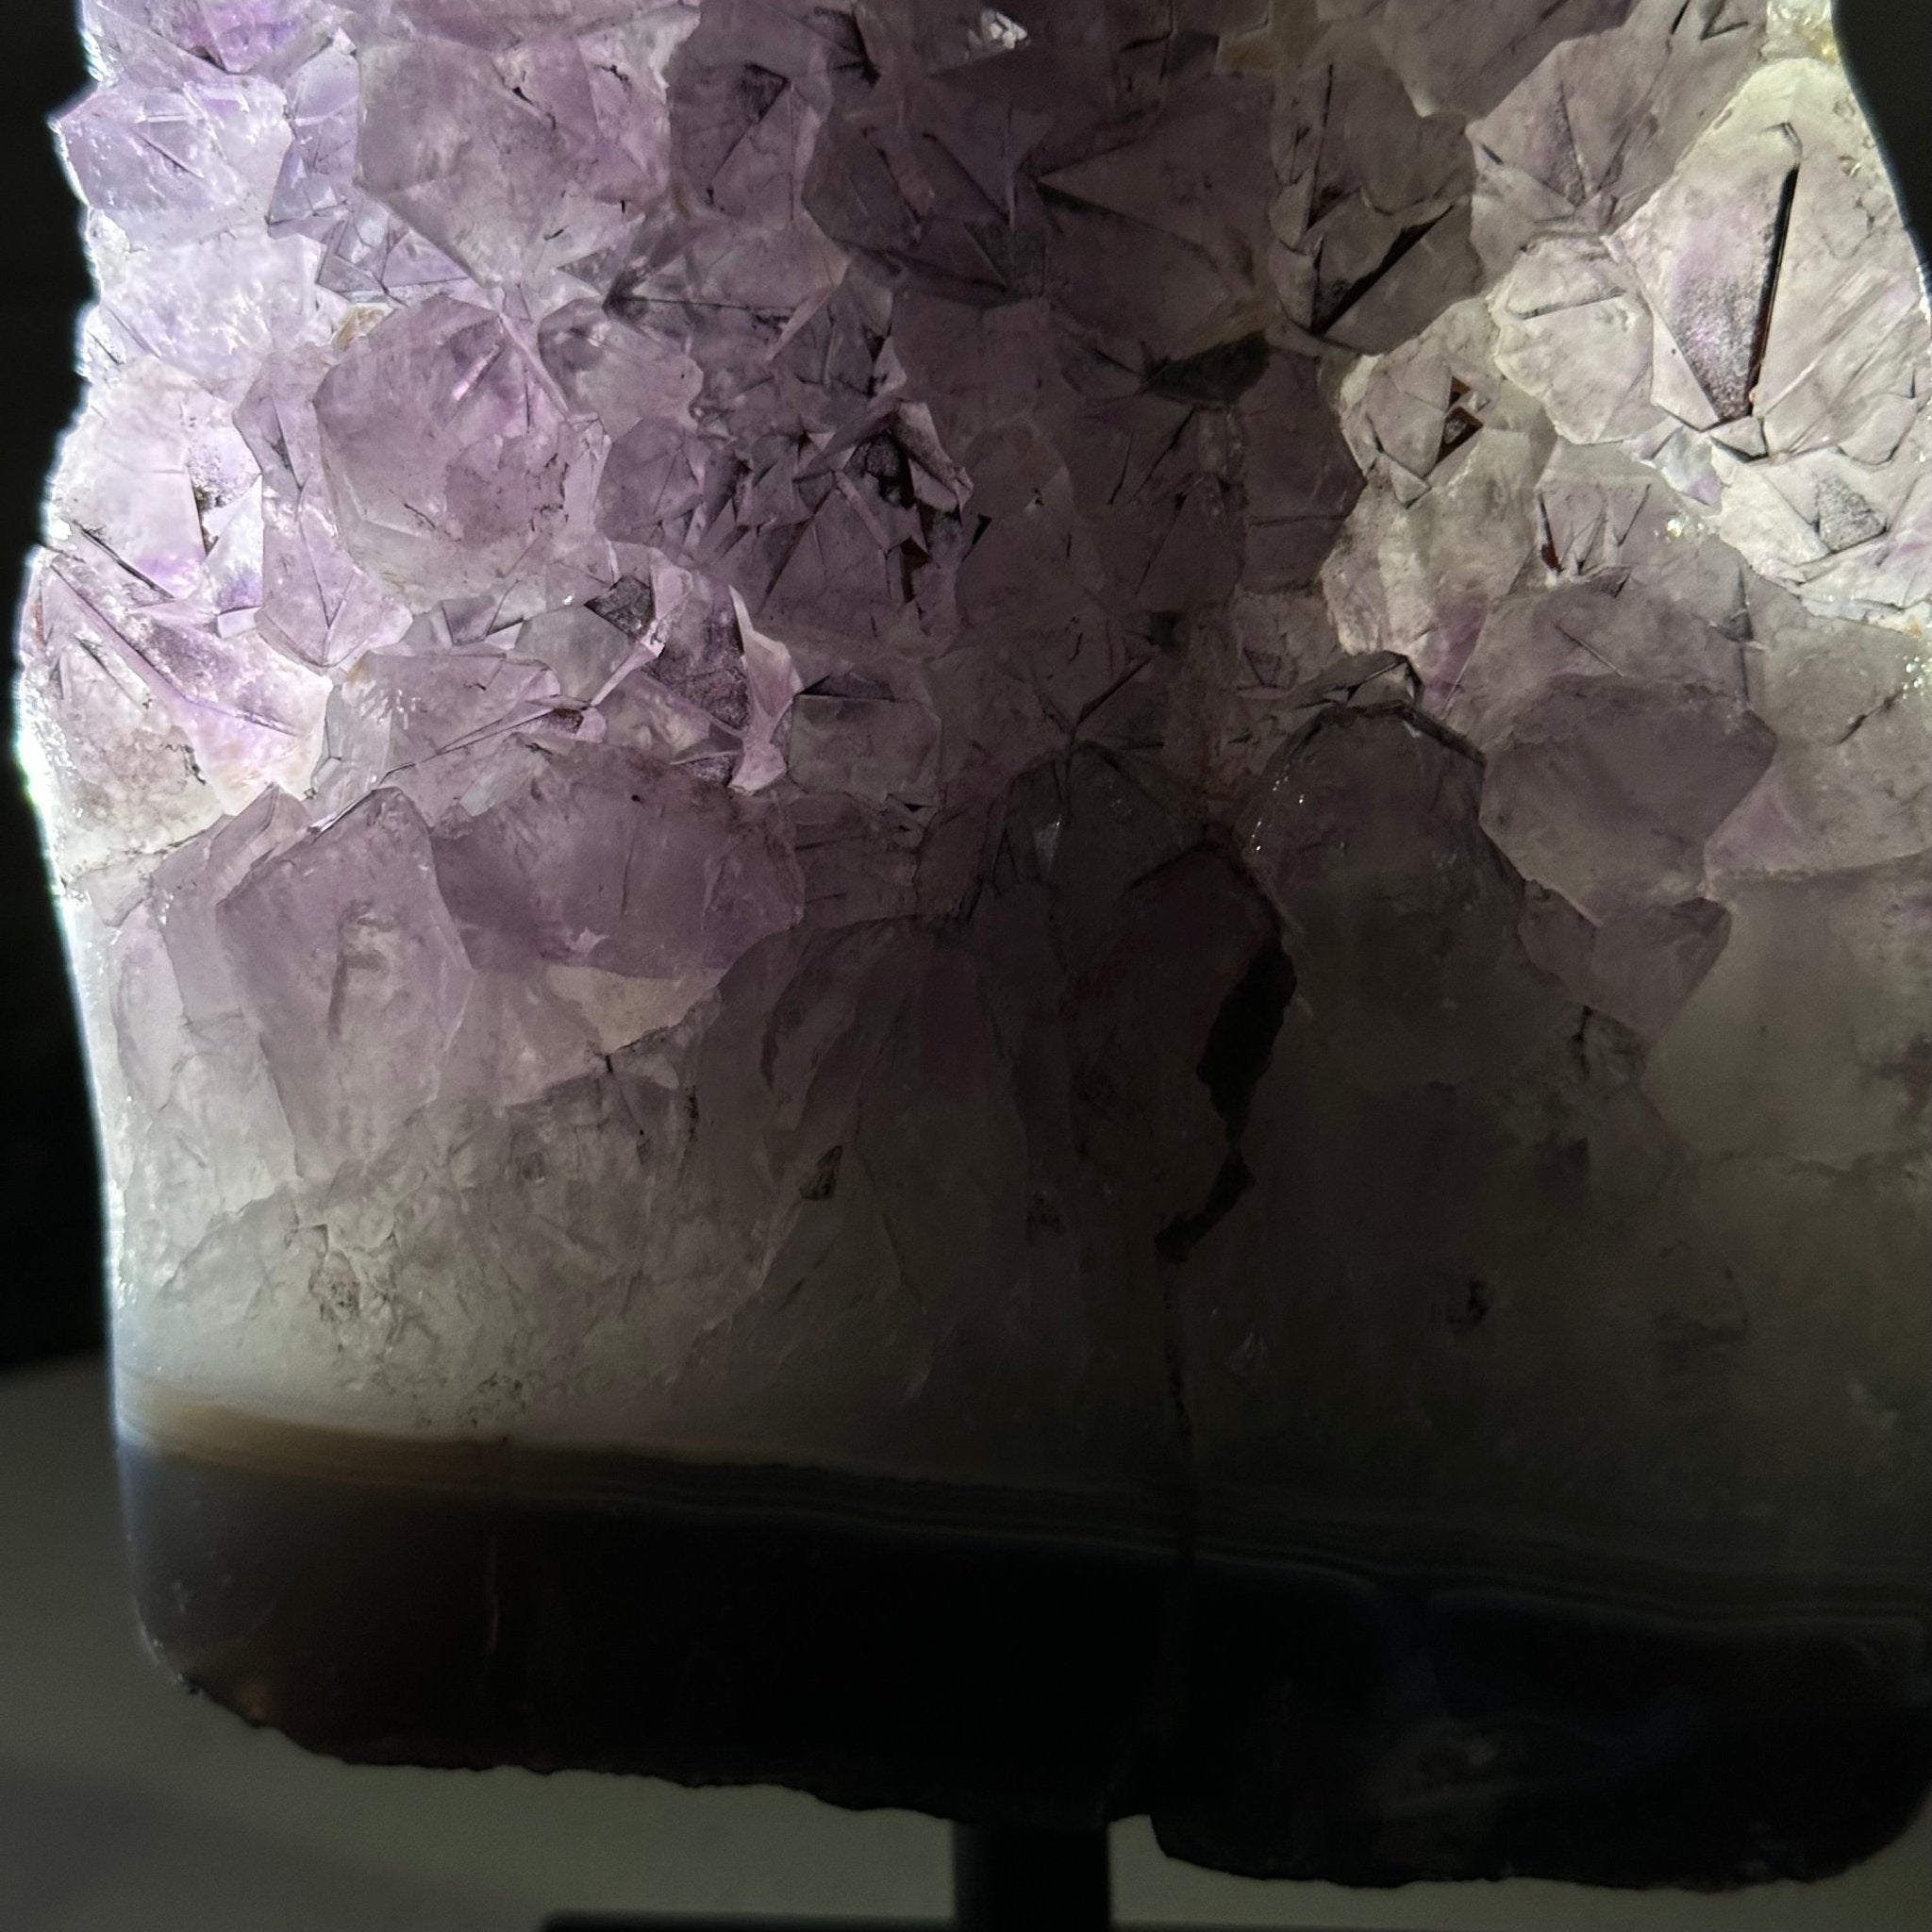 Amethyst Cluster on a Metal Base, 3.6 lbs & 7.4" Tall #5491-0172 - Brazil GemsBrazil GemsAmethyst Cluster on a Metal Base, 3.6 lbs & 7.4" Tall #5491-0172Clusters on Fixed Bases5491-0172